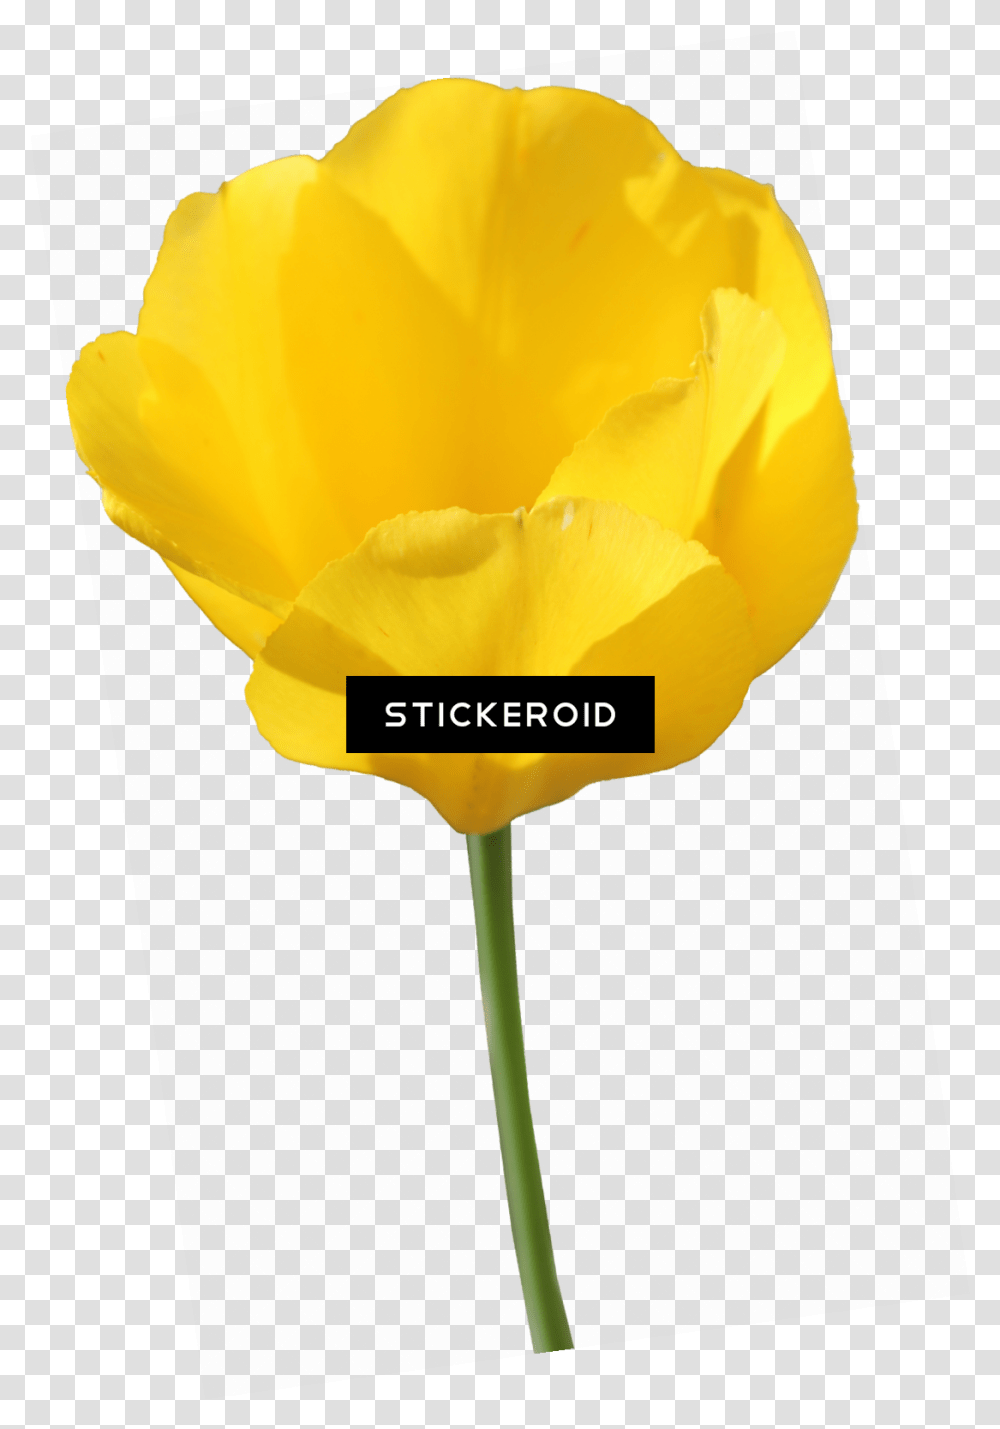 Download Yellow Tulip Flowers Tulip Image With No Tulip, Plant, Blossom, Petal, Rose Transparent Png